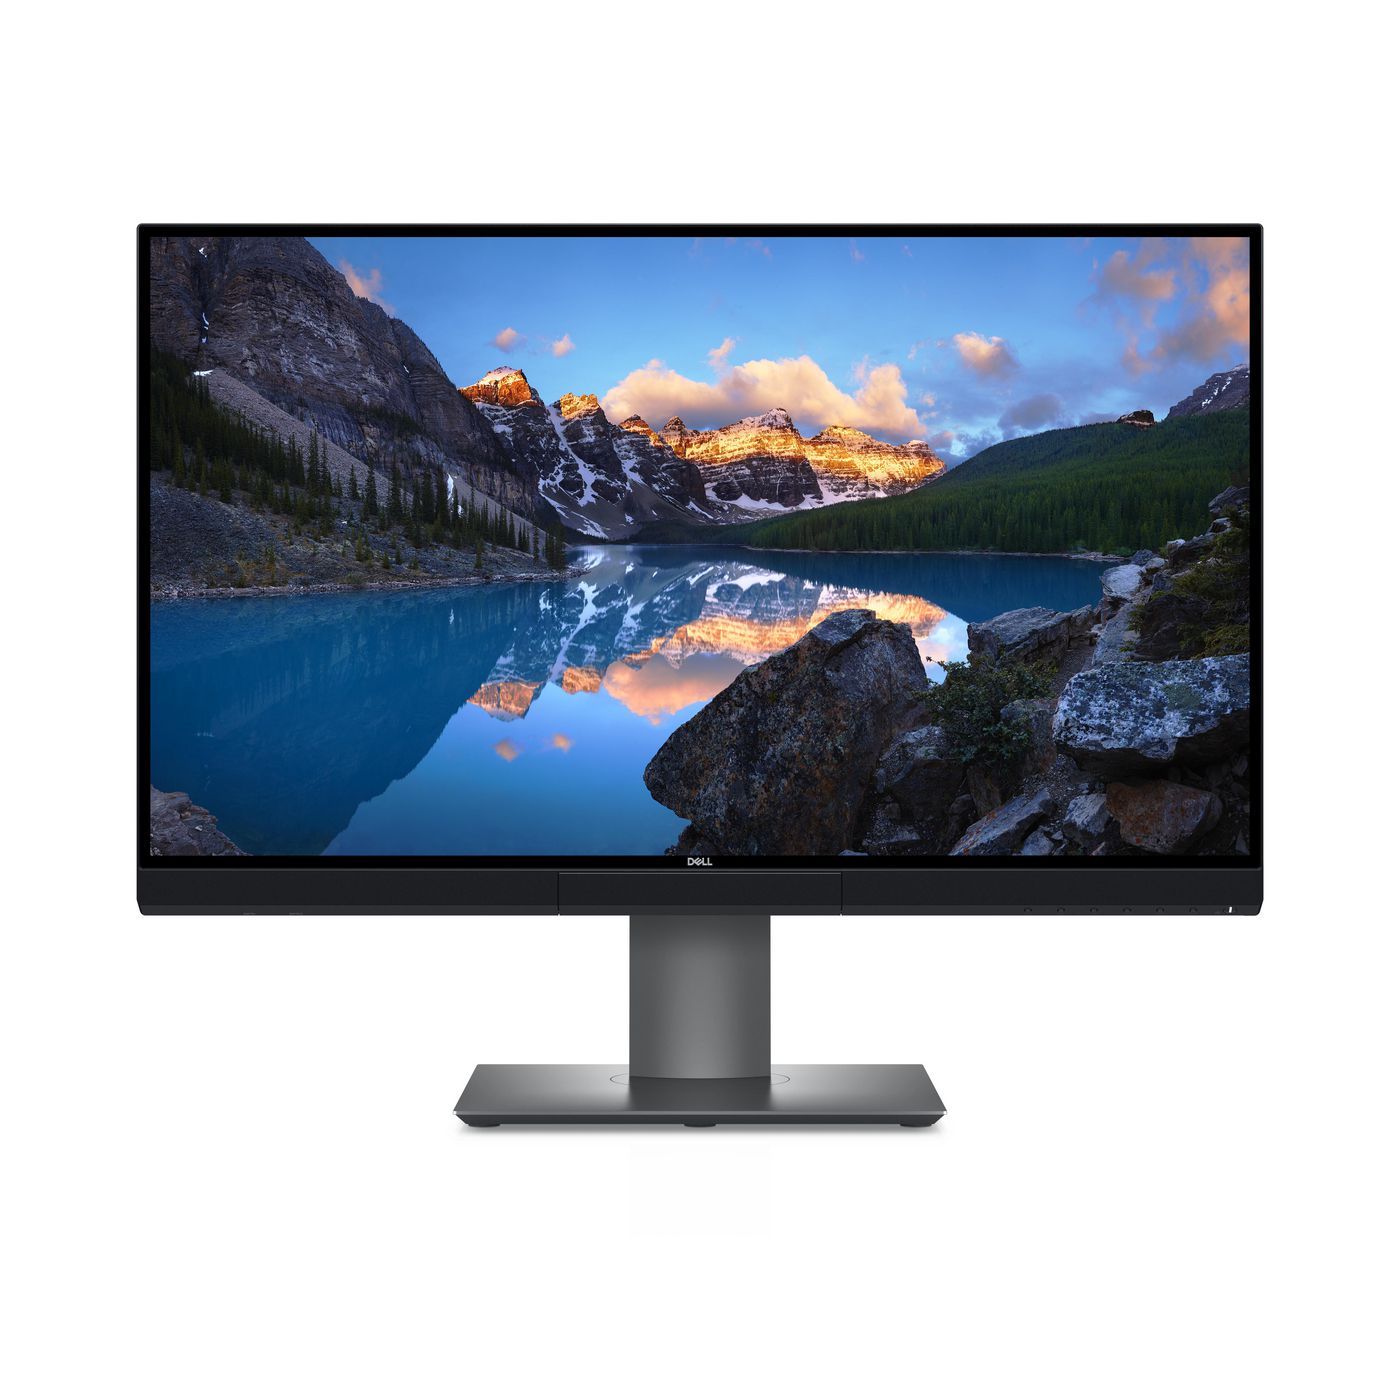 Monitor Up2720q - 27in - 3840x2160 - Black